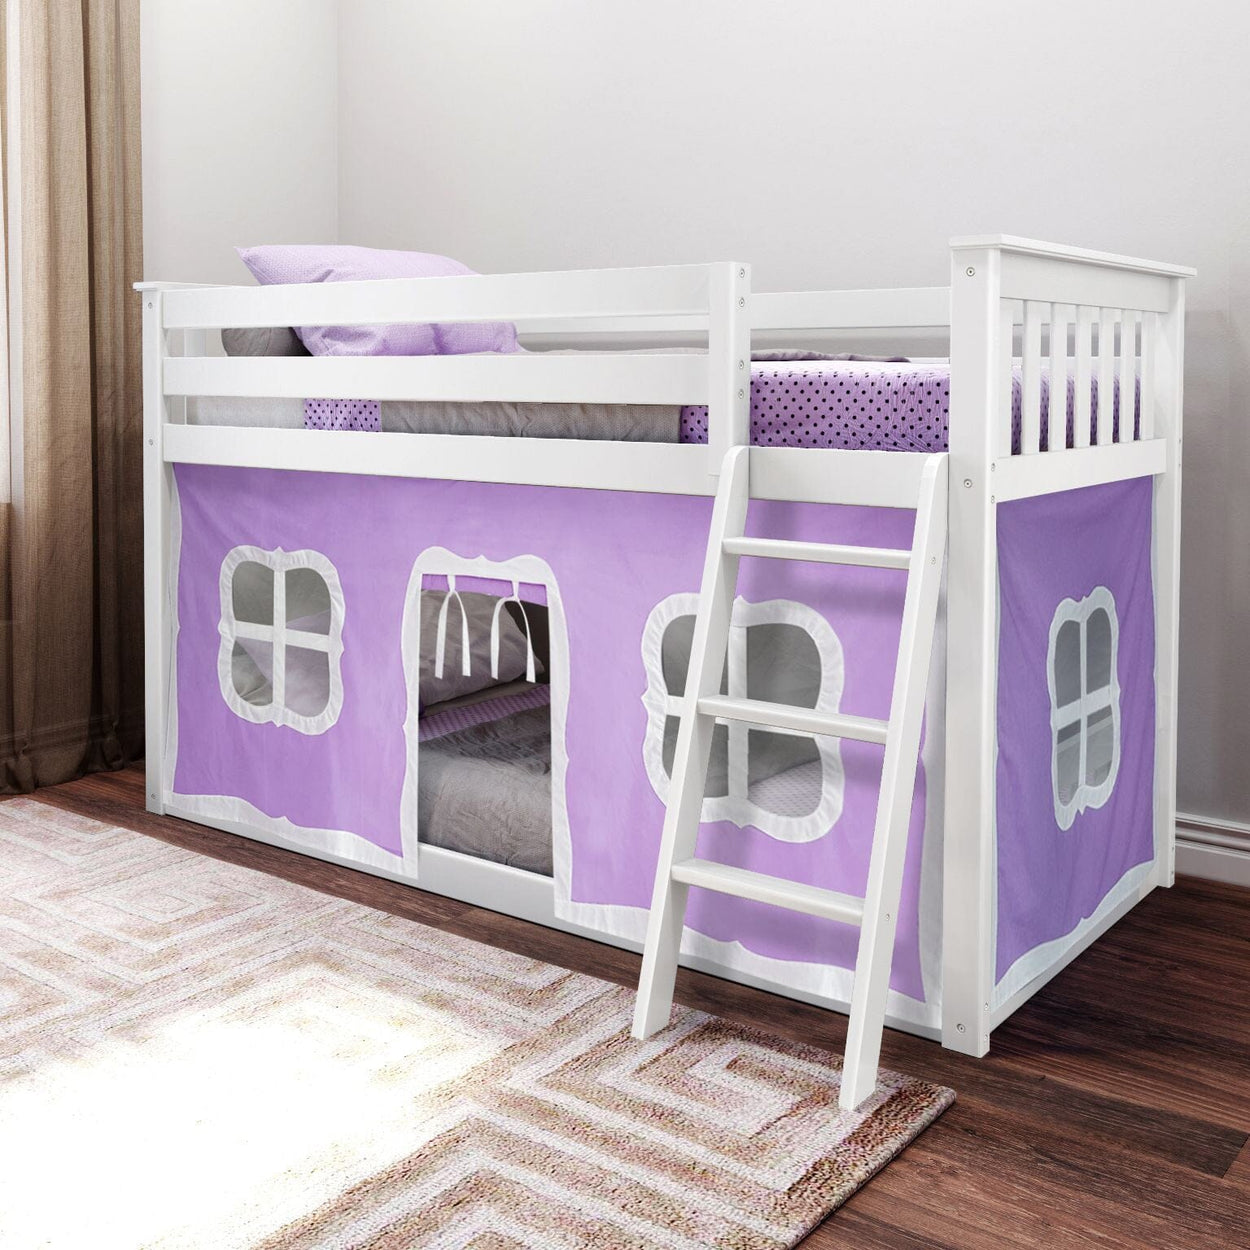 Bunk Beds Max & Lily Twin-Size Low Bunk Bed + Curtain White Purple 